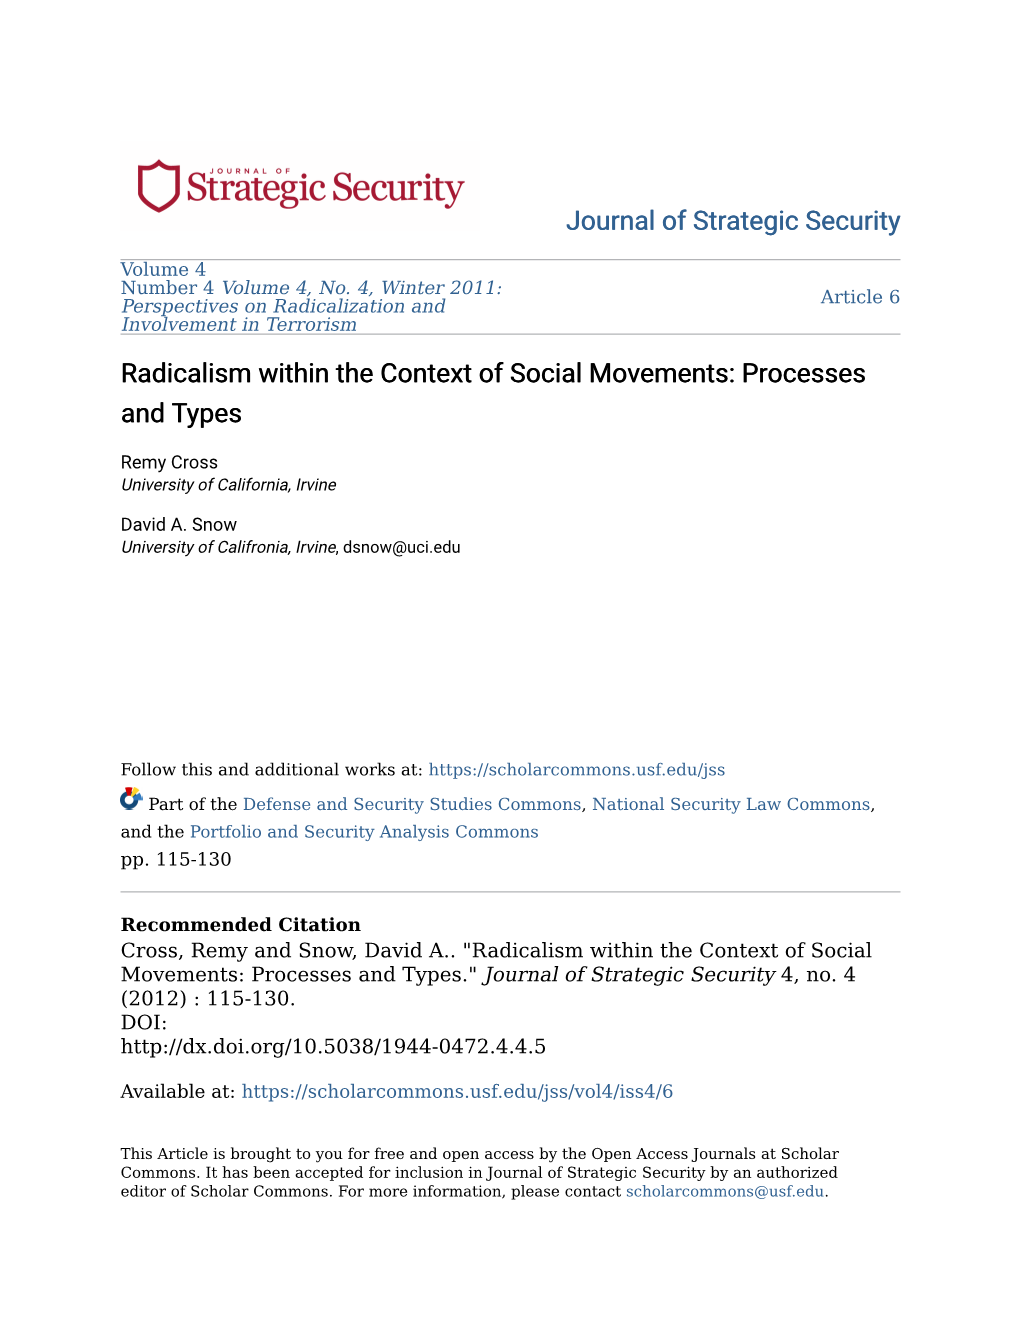 Radicalism Within the Context of Social Movements: Processes and Types